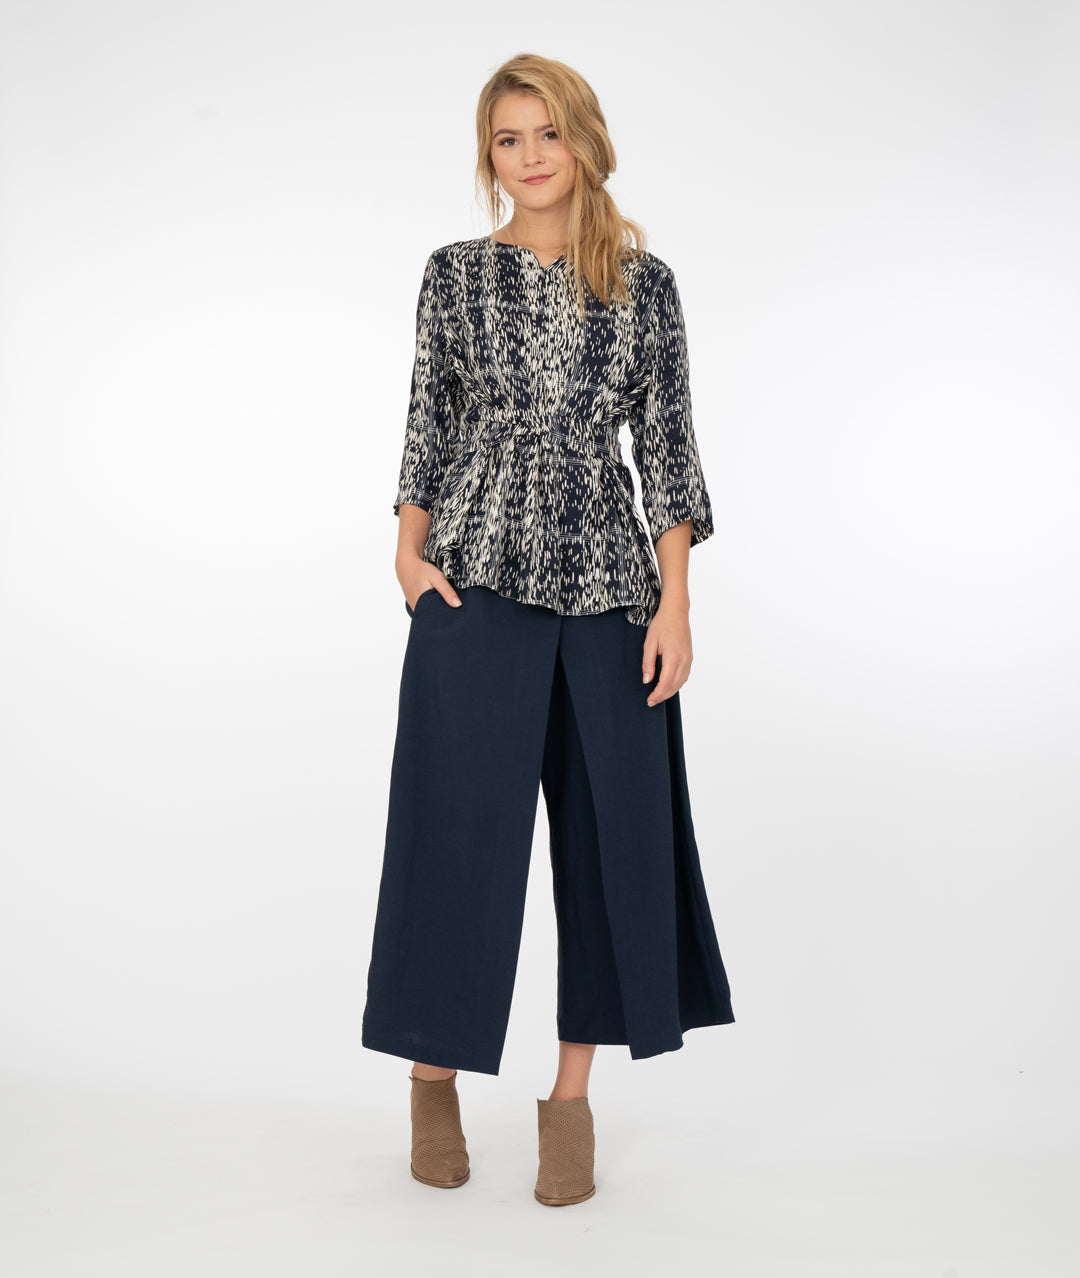 model in wide, navy pants with a blue and ivory print top